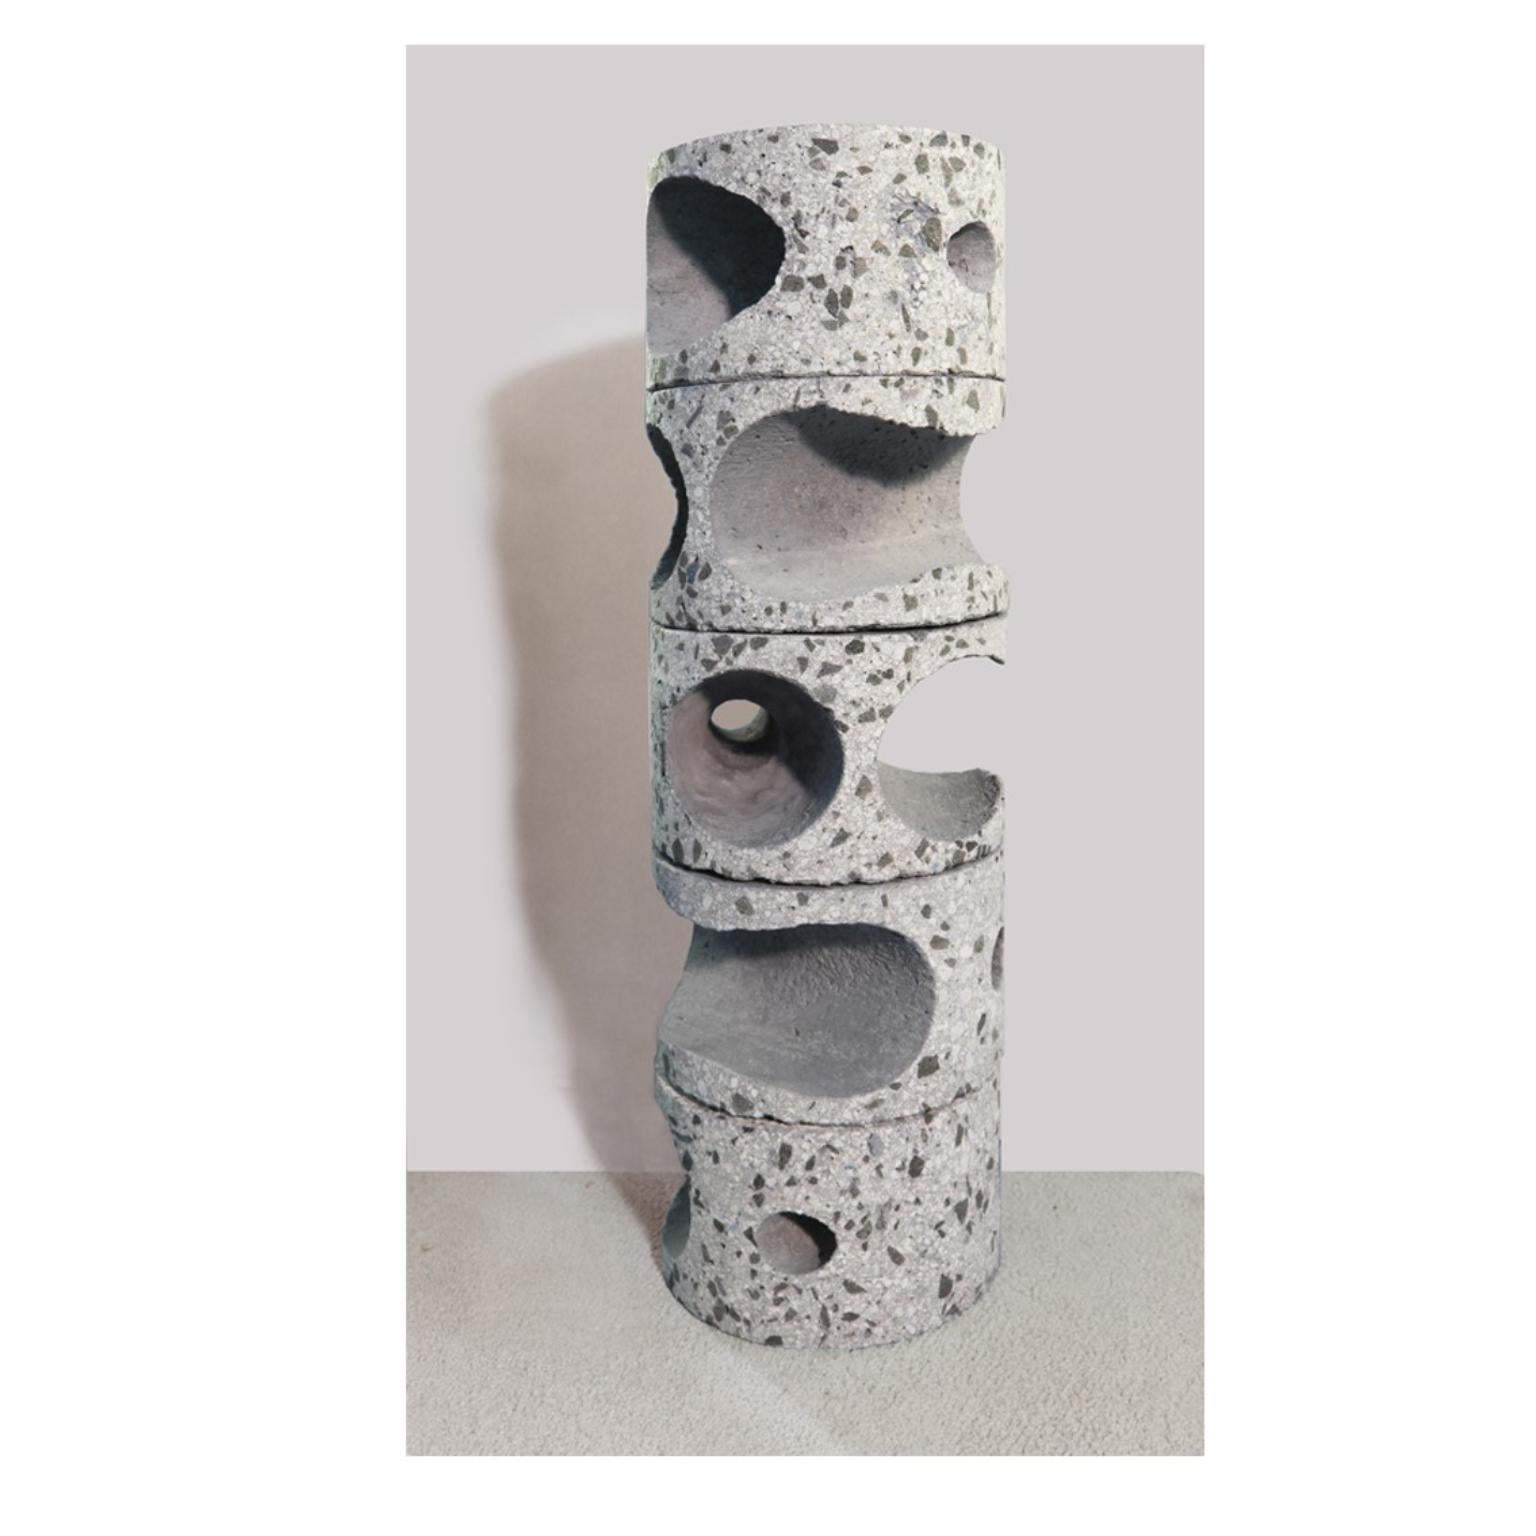 Core 2 wine bottle holders by Christian Zahr
Dimensions: W 29 x D 11 x H 29 cm
Materials: Concrete

Each piece is handmade.

Core 2 wine bottle holders is the fruit of a research on form, fonction and materiality. It is the end result of